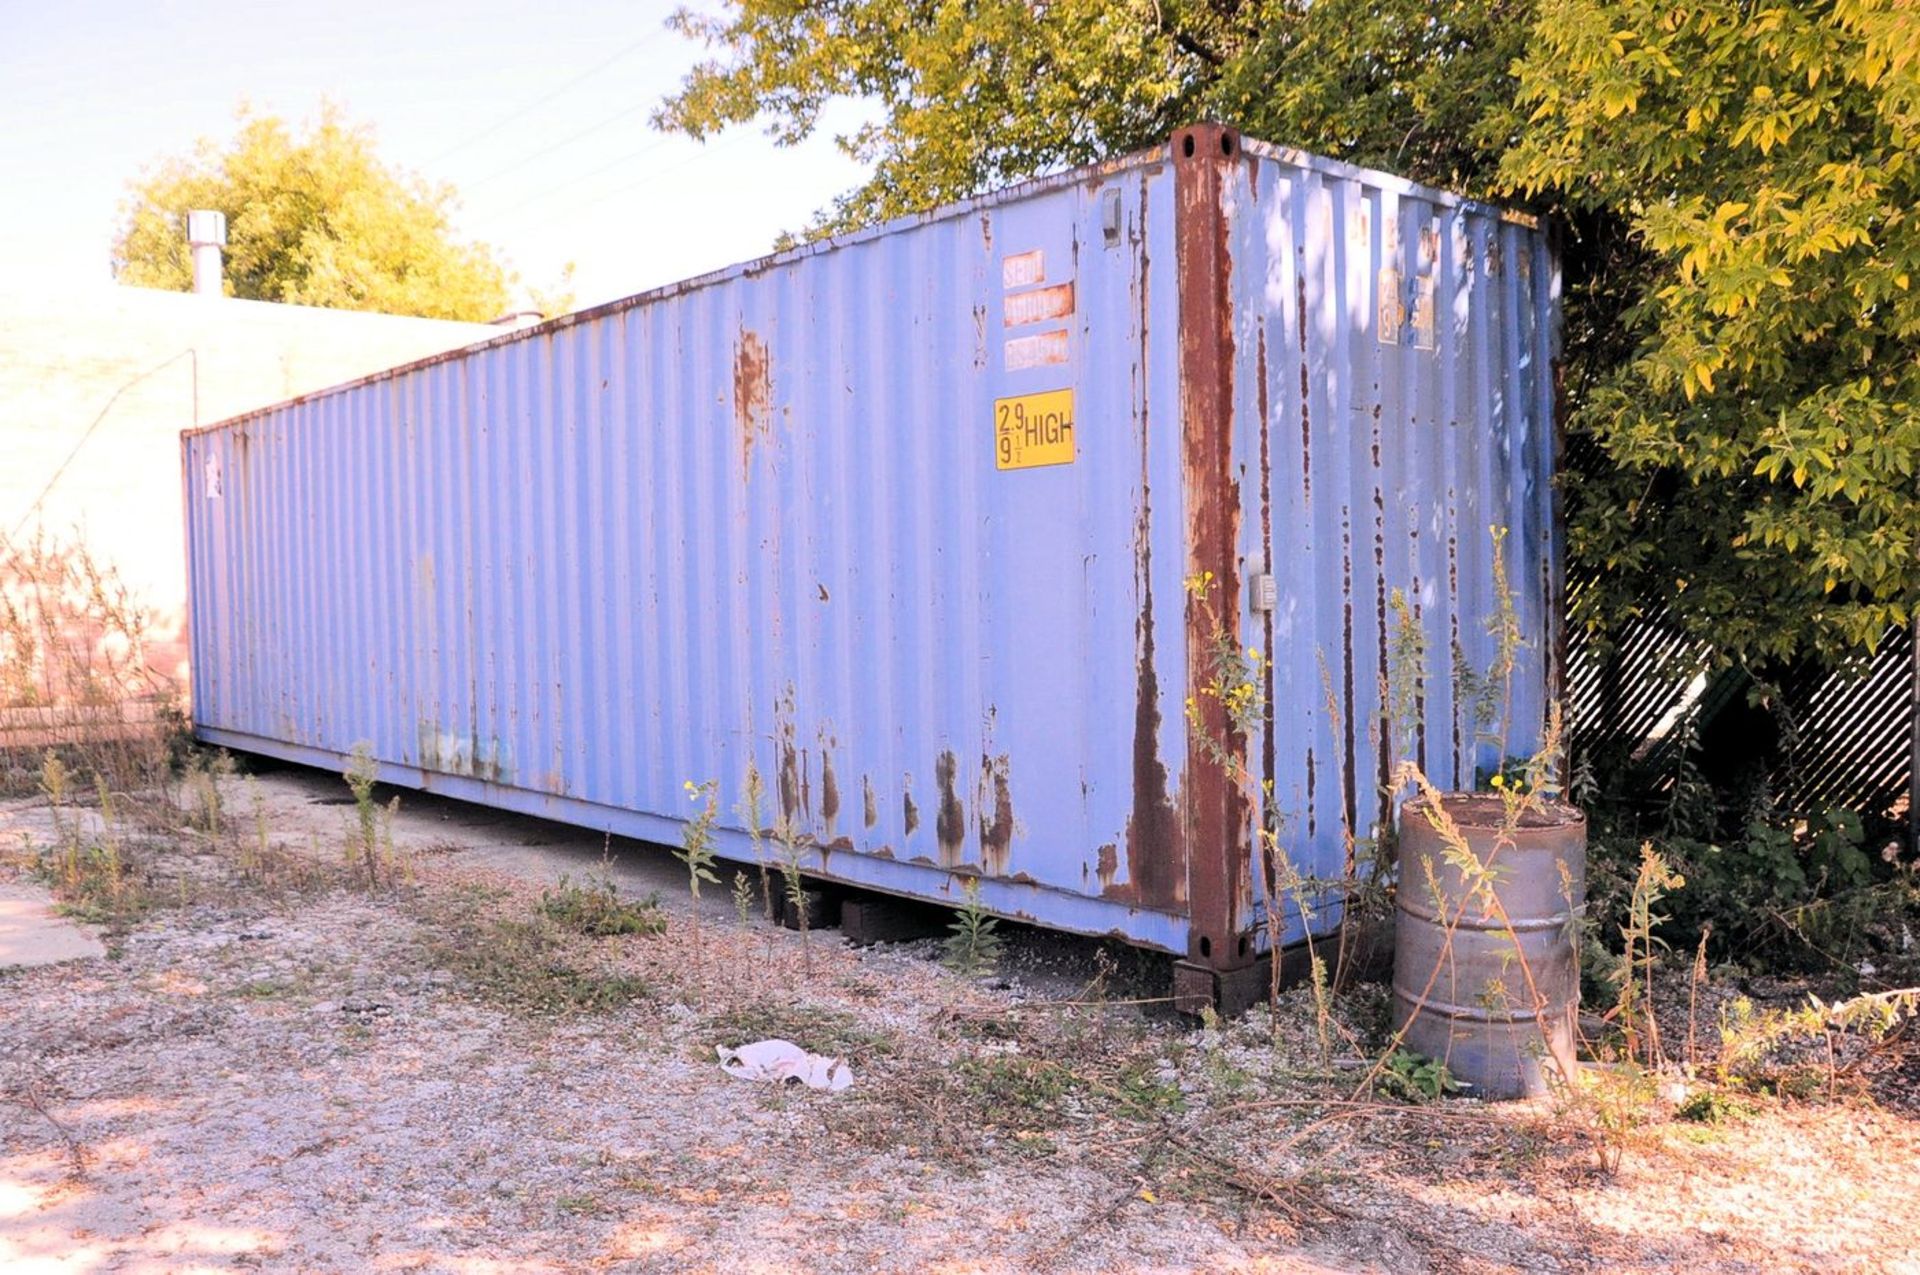 40 ft. Model ROK/010-KR Type HSM-731 Shipping/Storage Container, S/N: HSMF-96420 (1991); 40 ft. long - Image 2 of 5